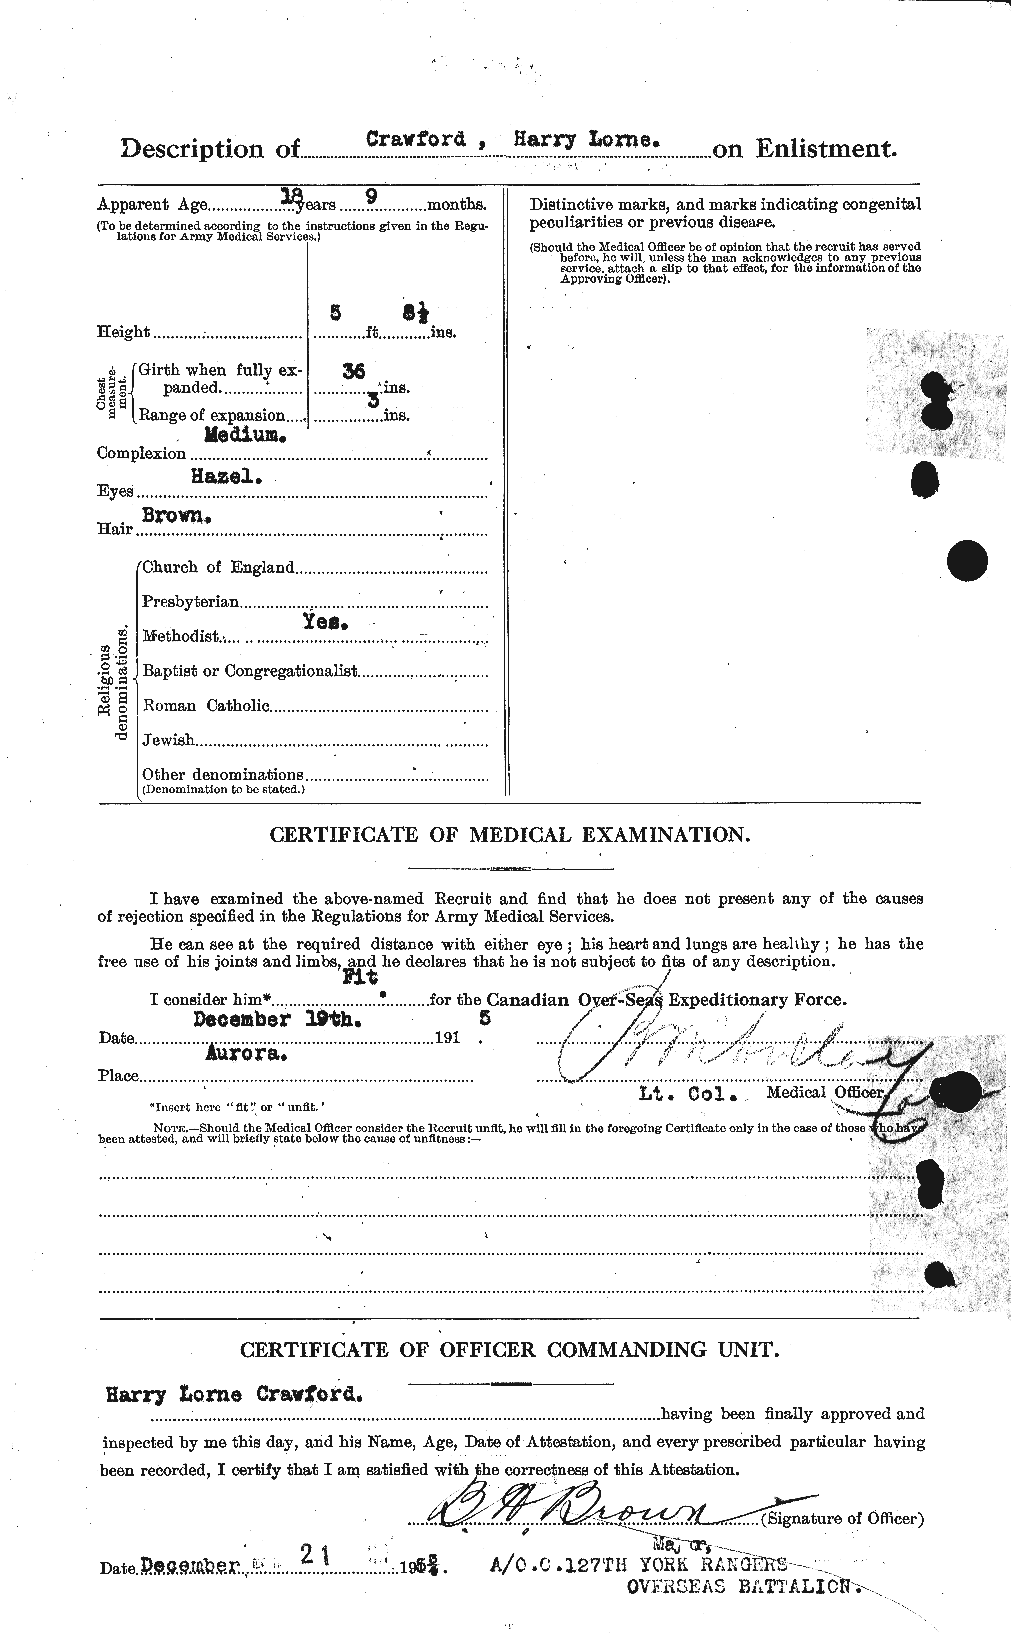 Personnel Records of the First World War - CEF 060577b